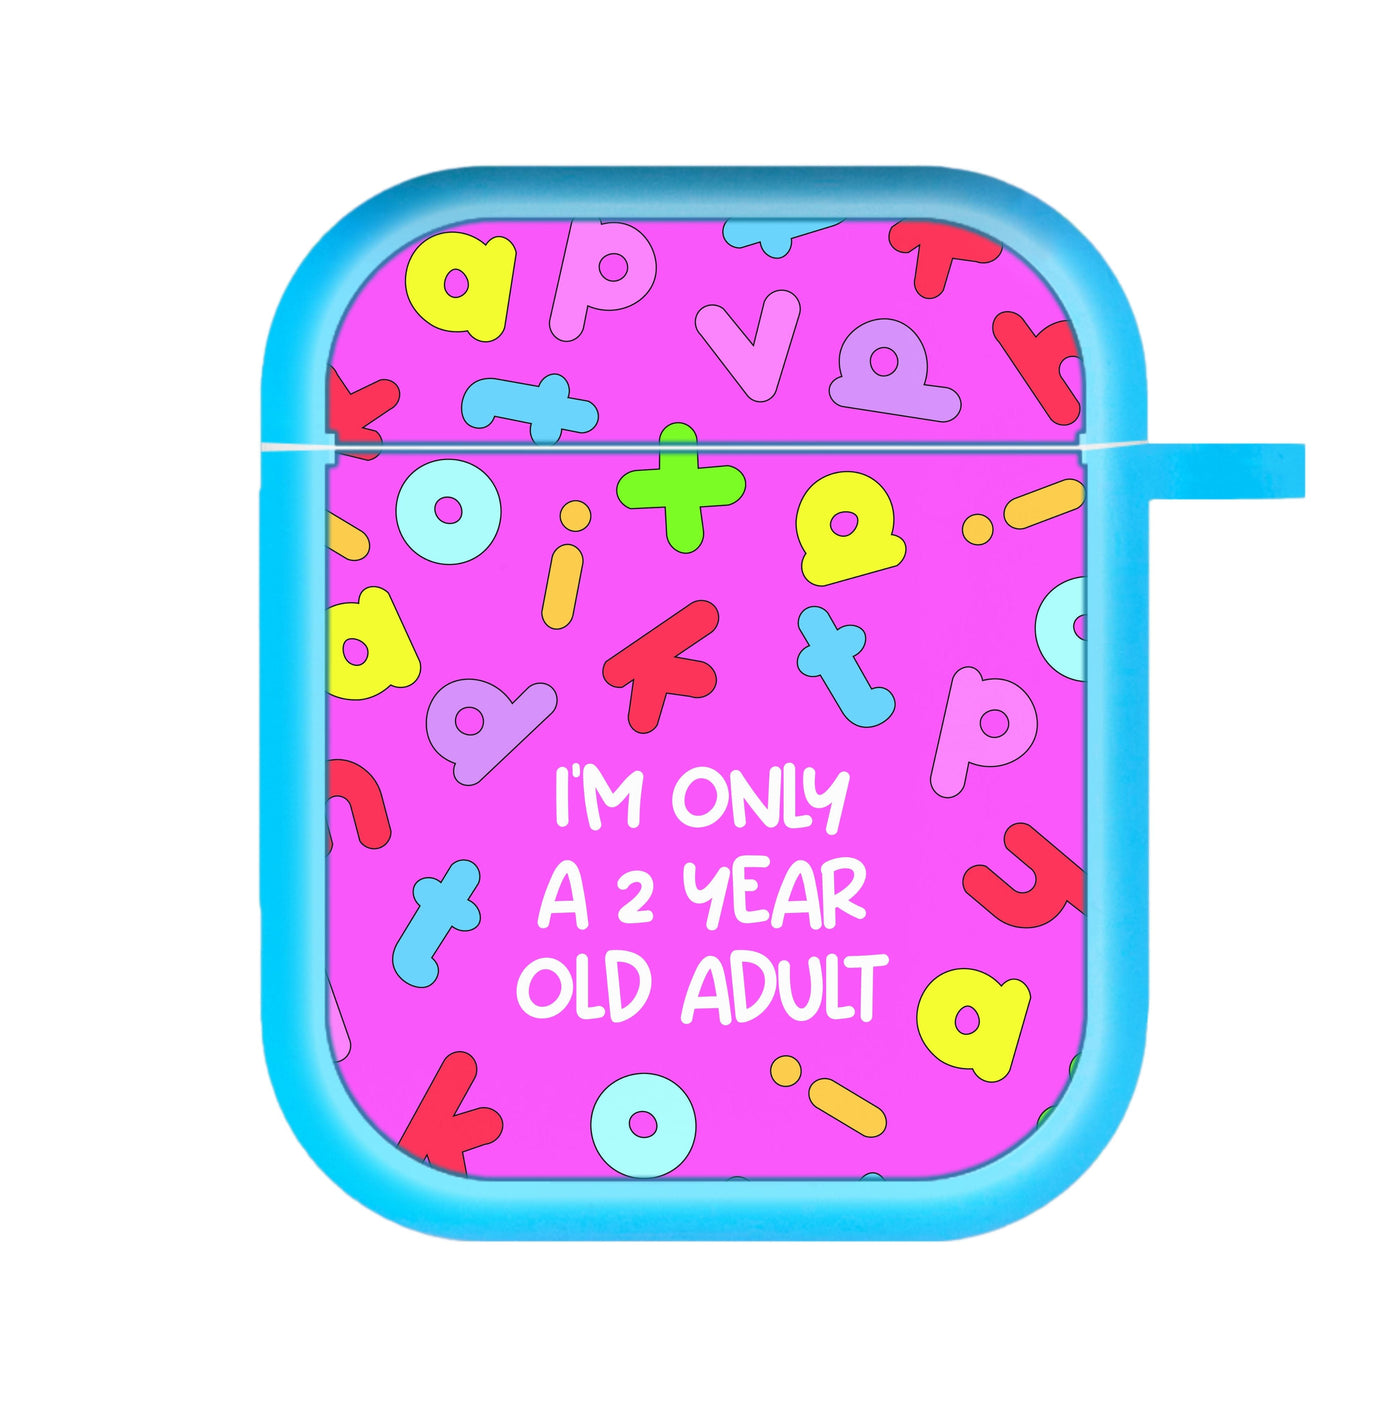 I'm Only A 2 Year Old Adult - Aesthetic Quote AirPods Case